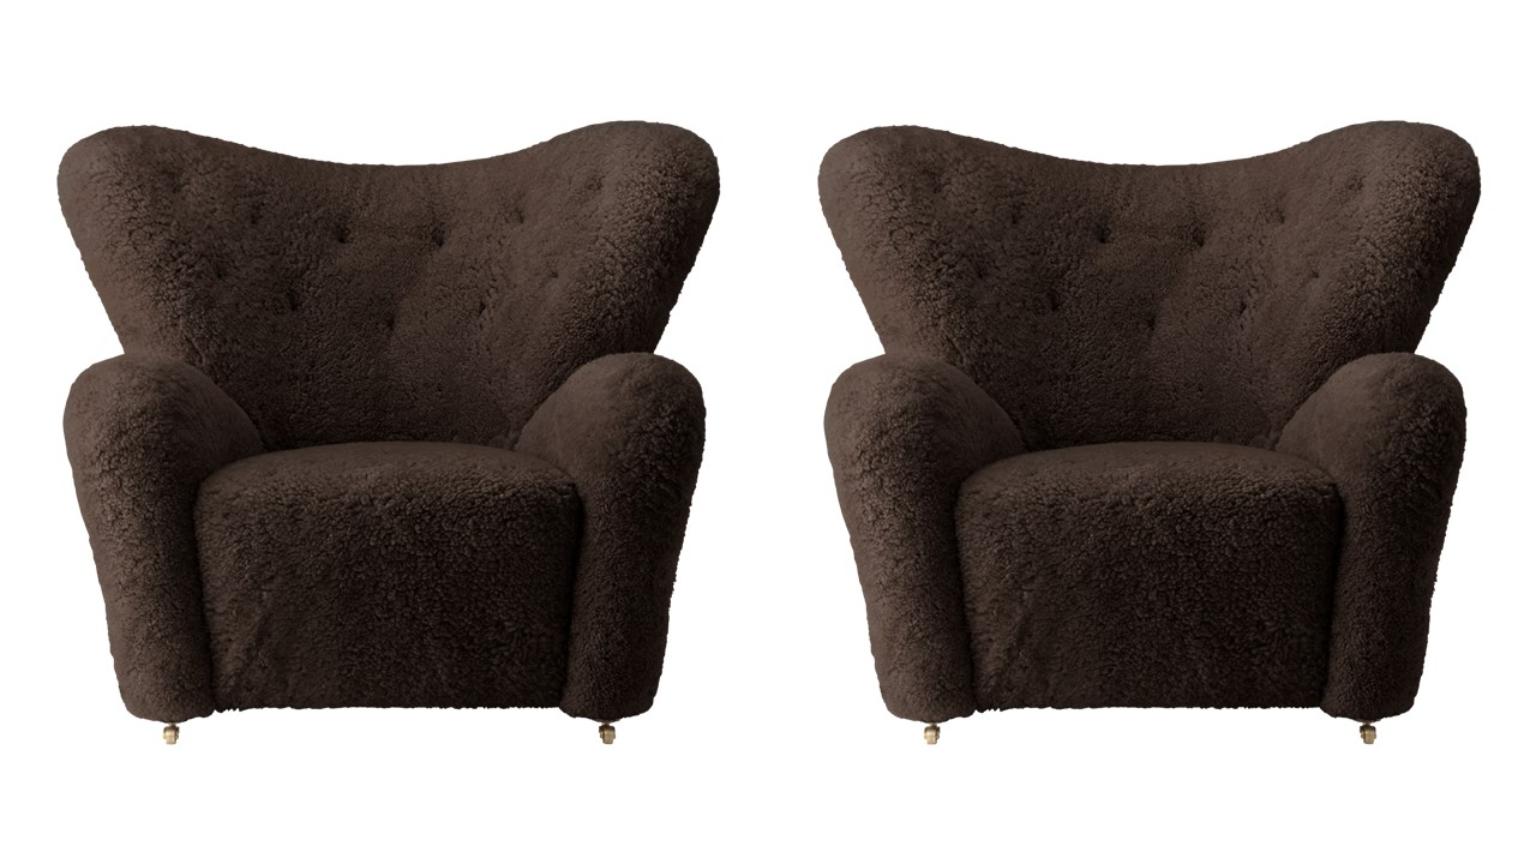 Set of 2 Espresso sheepskin the tired man lounge chairby Lassen
Dimensions: W 102 x D 87 x H 88 cm 
Materials: Sheepskin

Flemming Lassen designed the overstuffed easy chair, The Tired Man, for The Copenhagen Cabinetmakers’ Guild Competition in